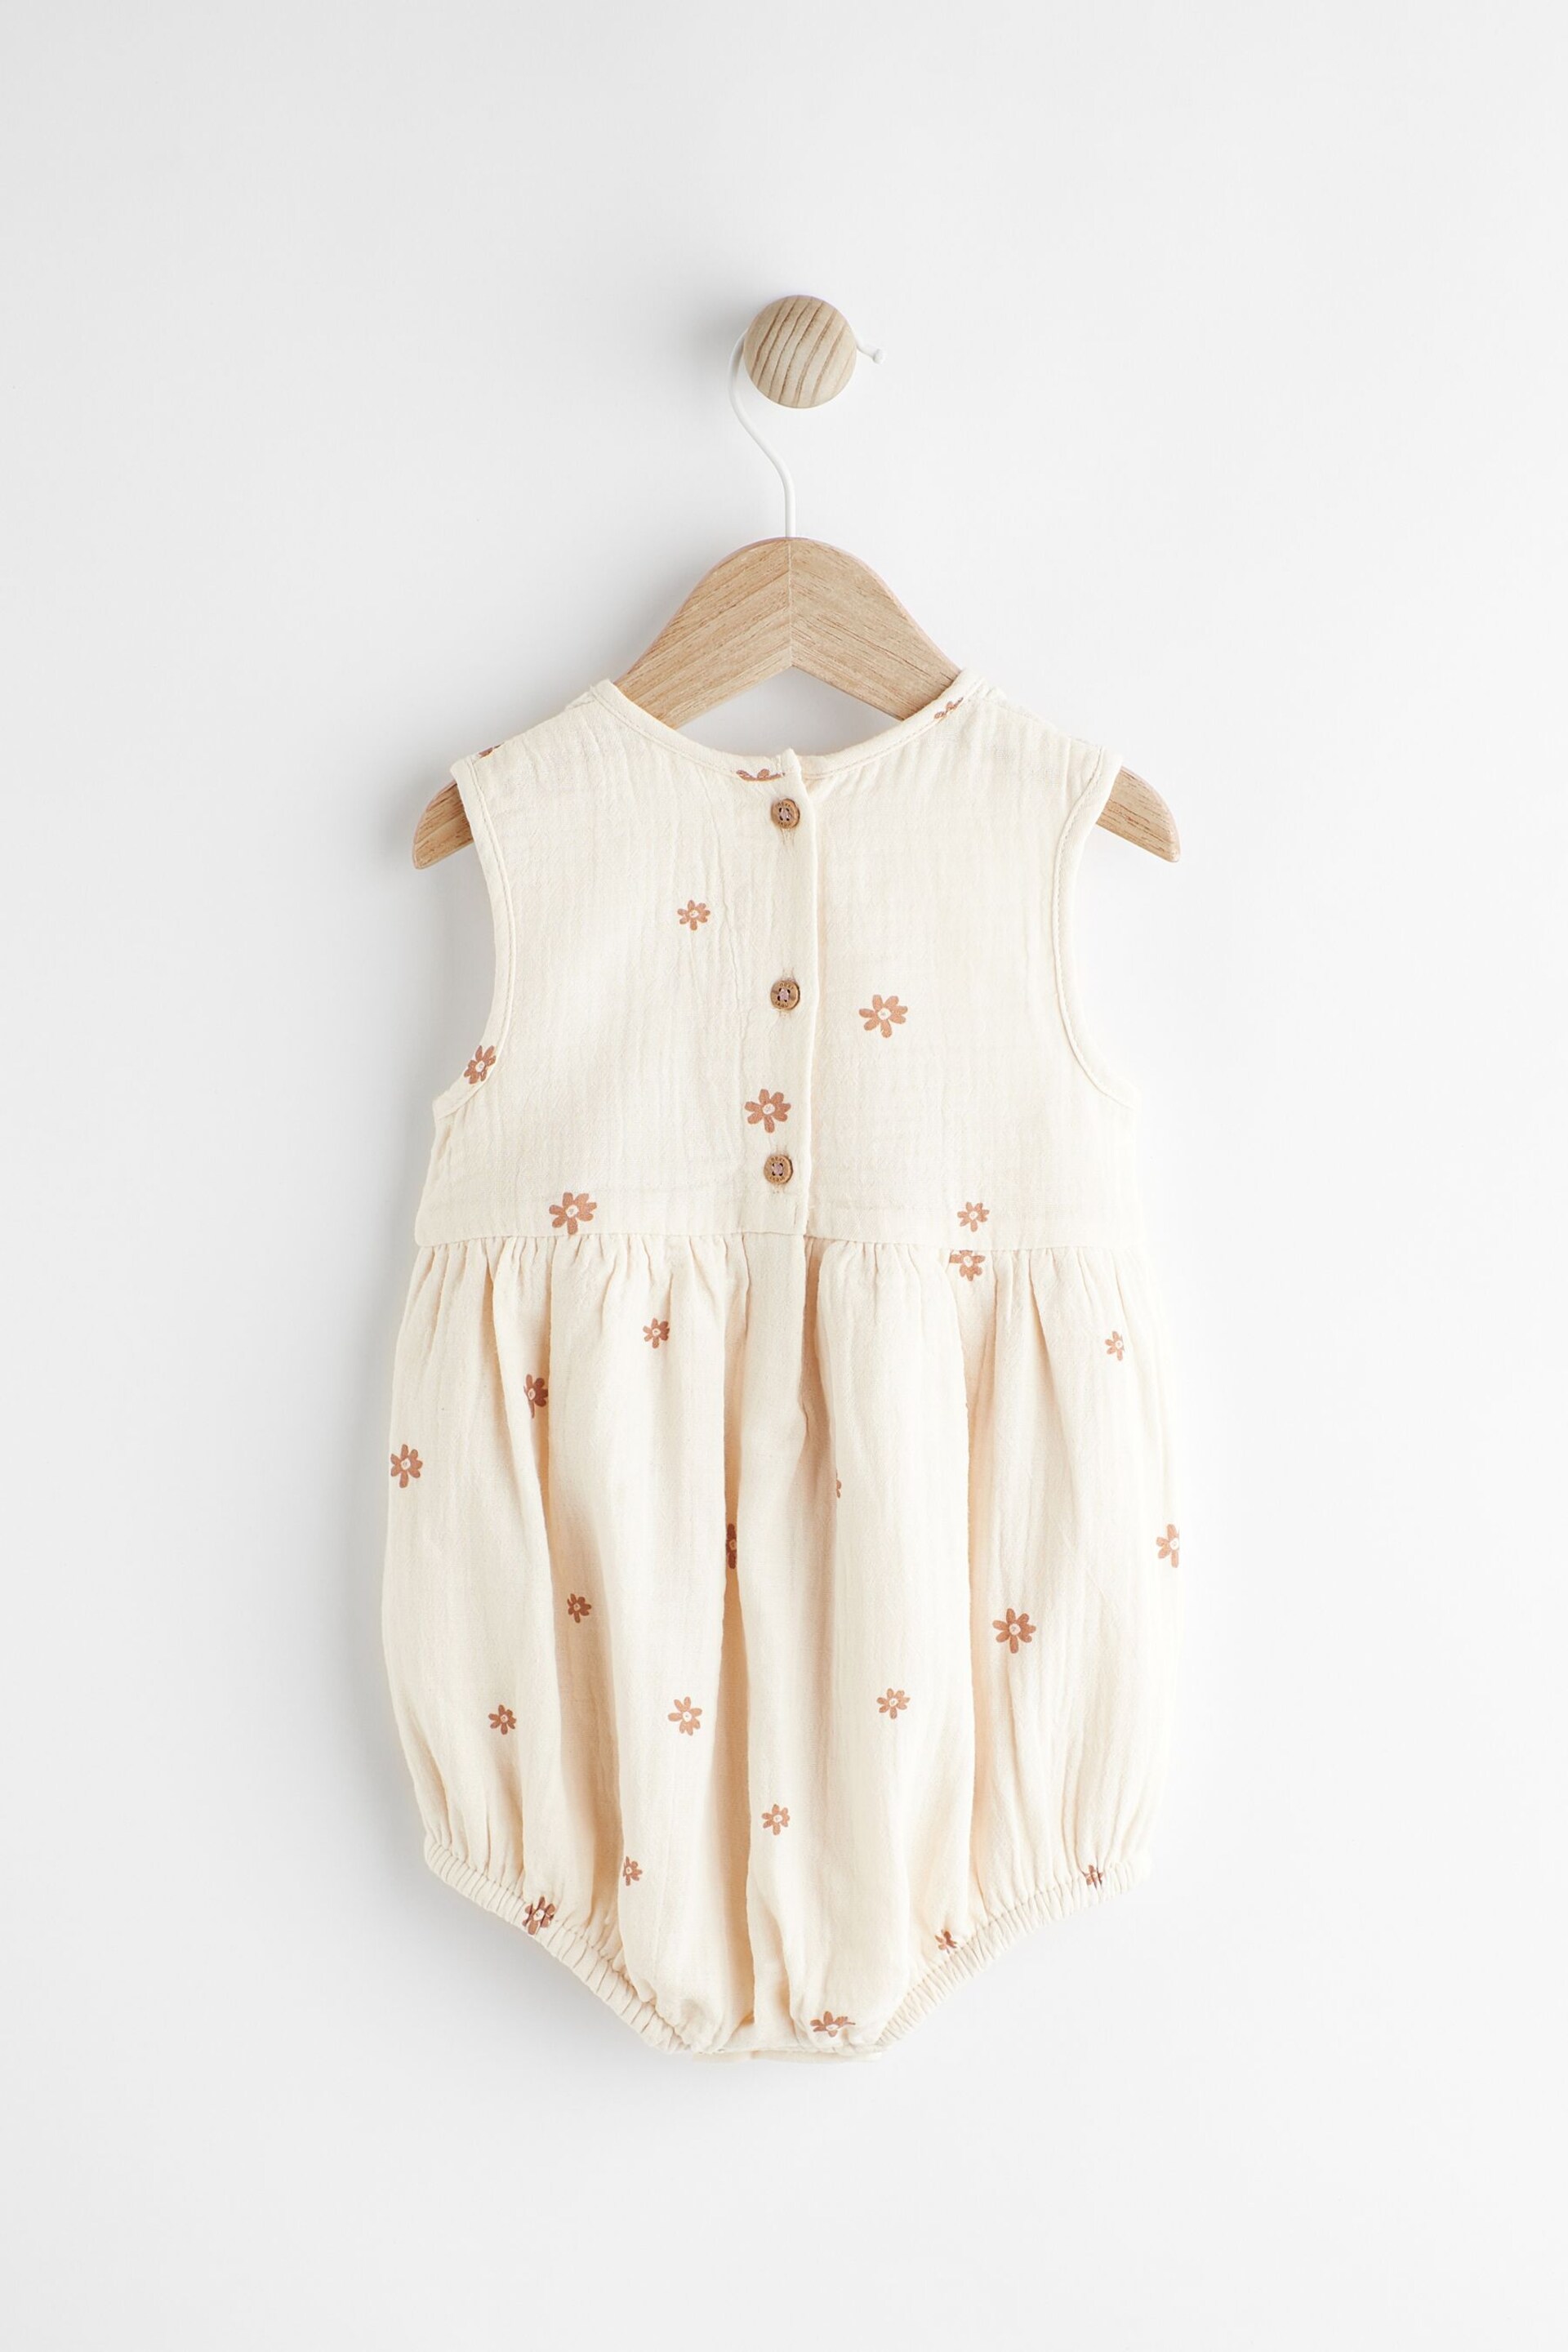 Beige Floral Embroidery Baby Bloomer Romper (0mths-3yrs) - Image 6 of 10